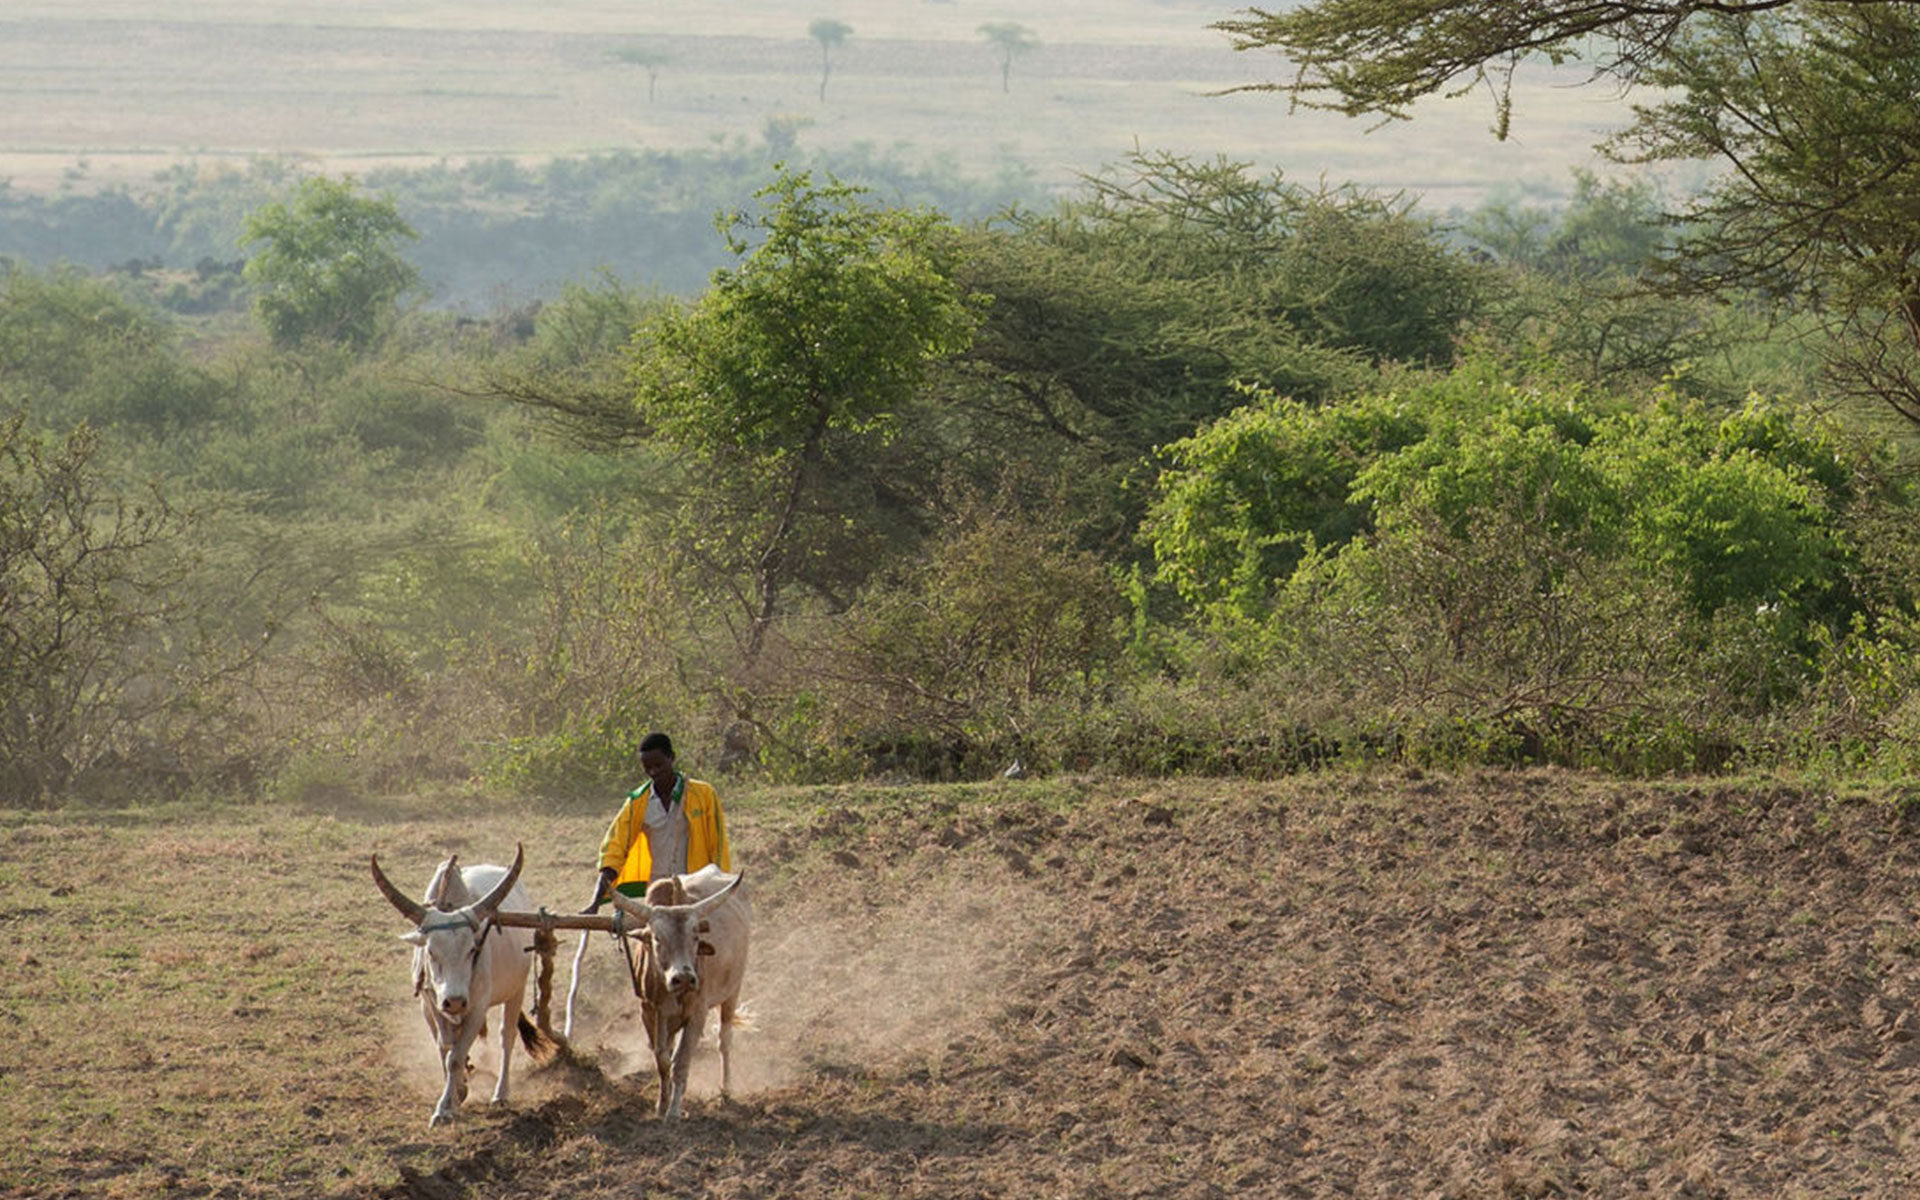 A young man walks with oxen through a dry field